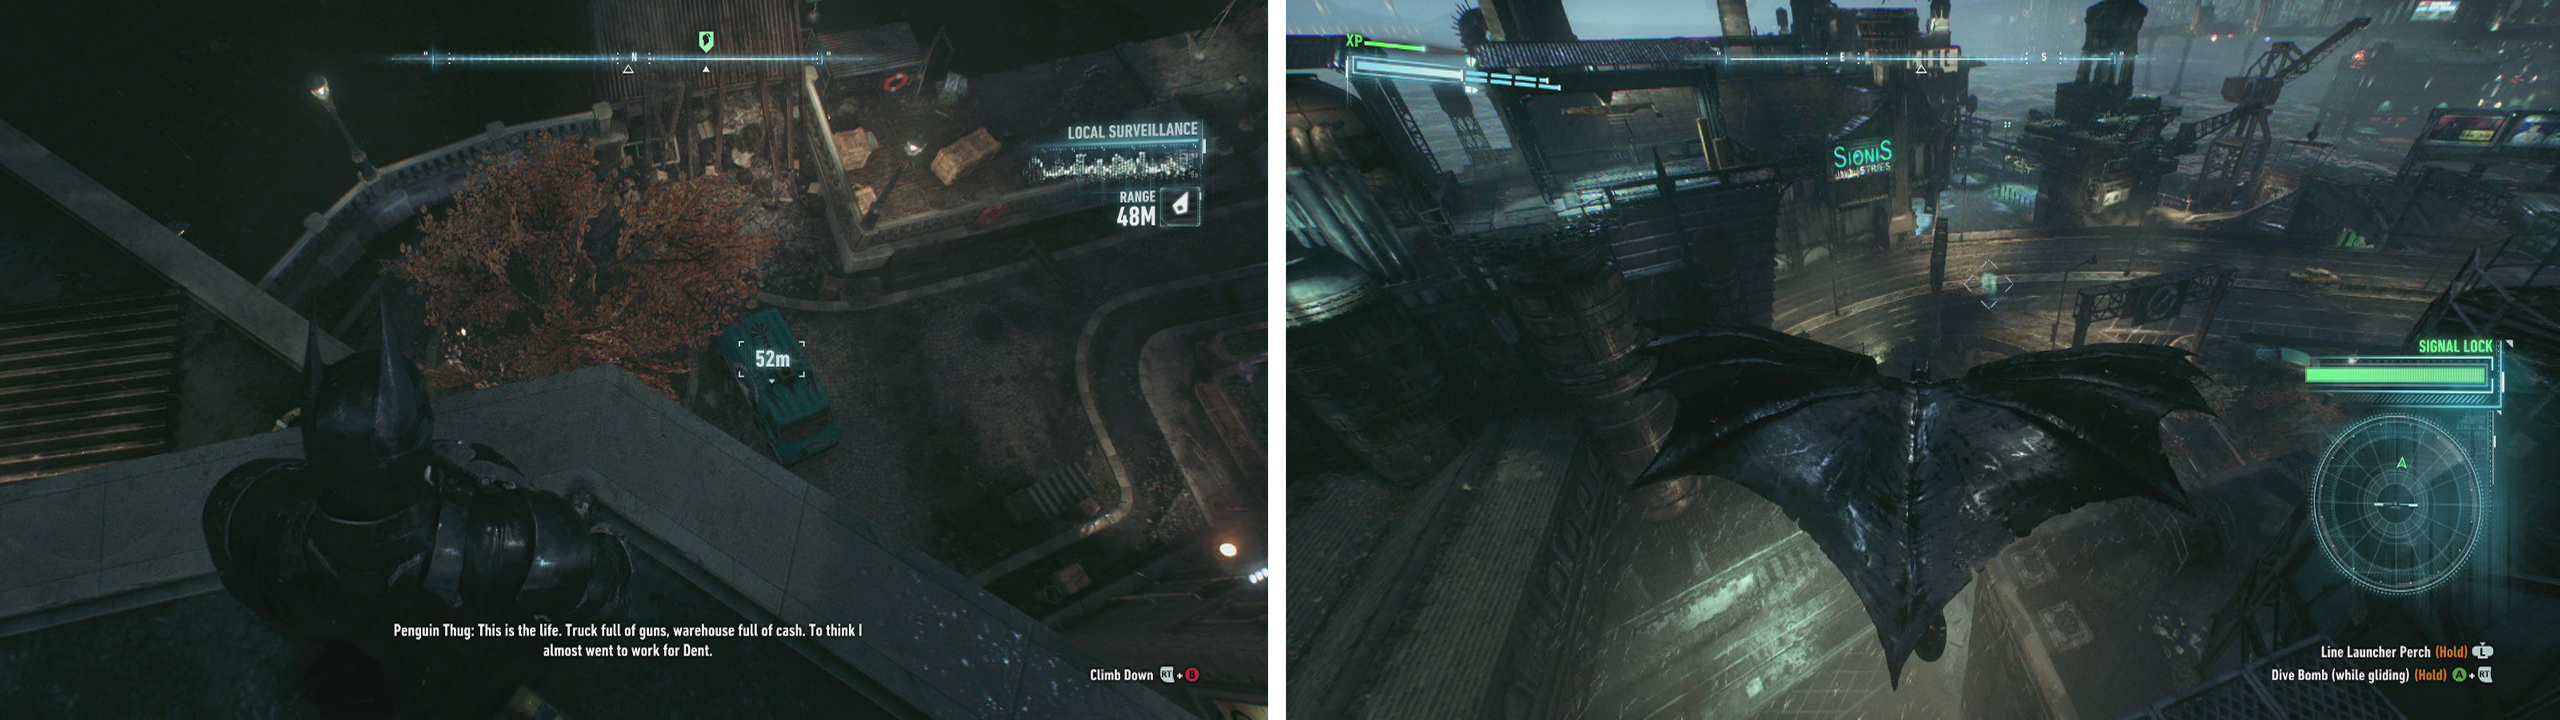 Find and shoot the target van with a Disruptor (left). Follow it to its destination (right).